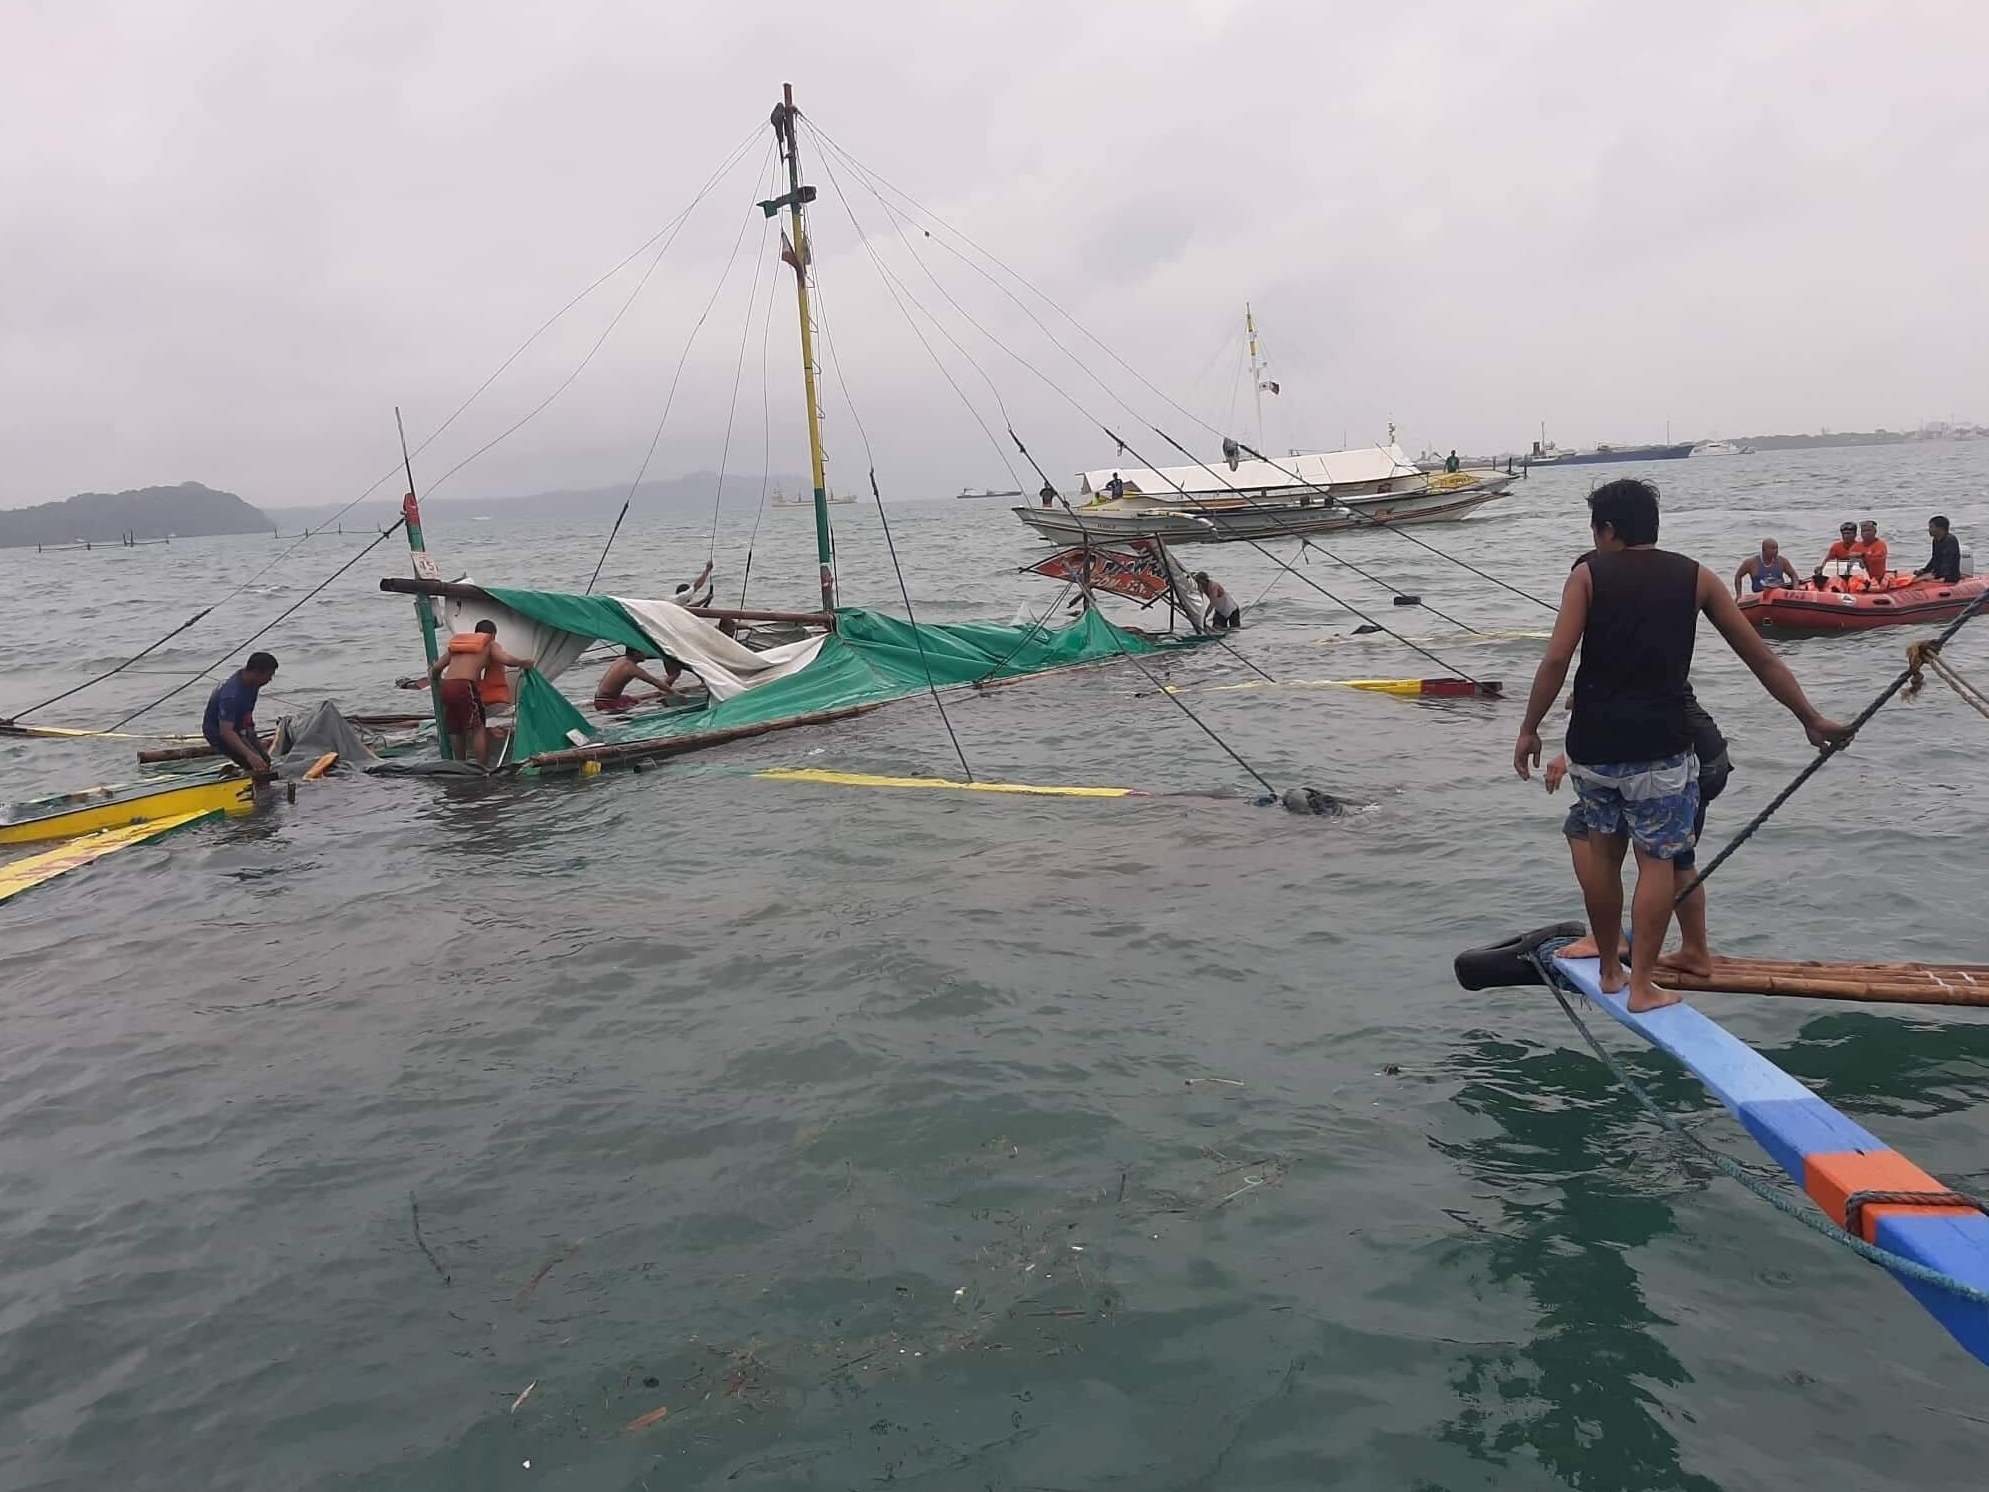 Three boats capsized after being flipped over by sudden wind gusts and powerful waves off two central Philippine provinces